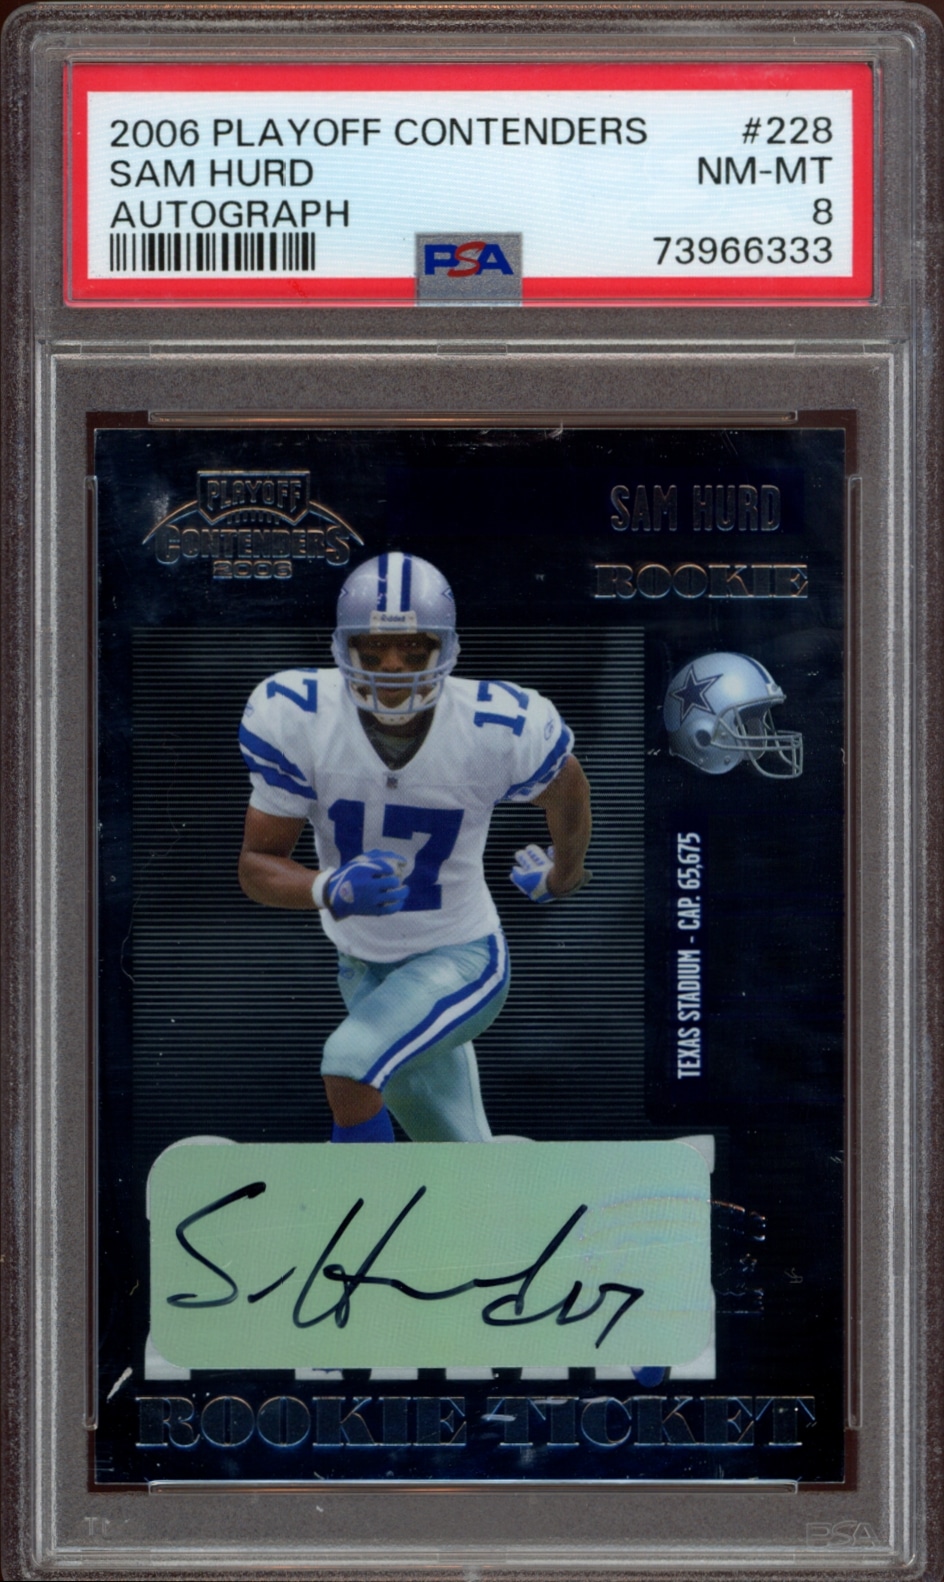 Sam Hurd autographed 2006 Playoff Contenders card, graded NM-MT 8 by PSA.